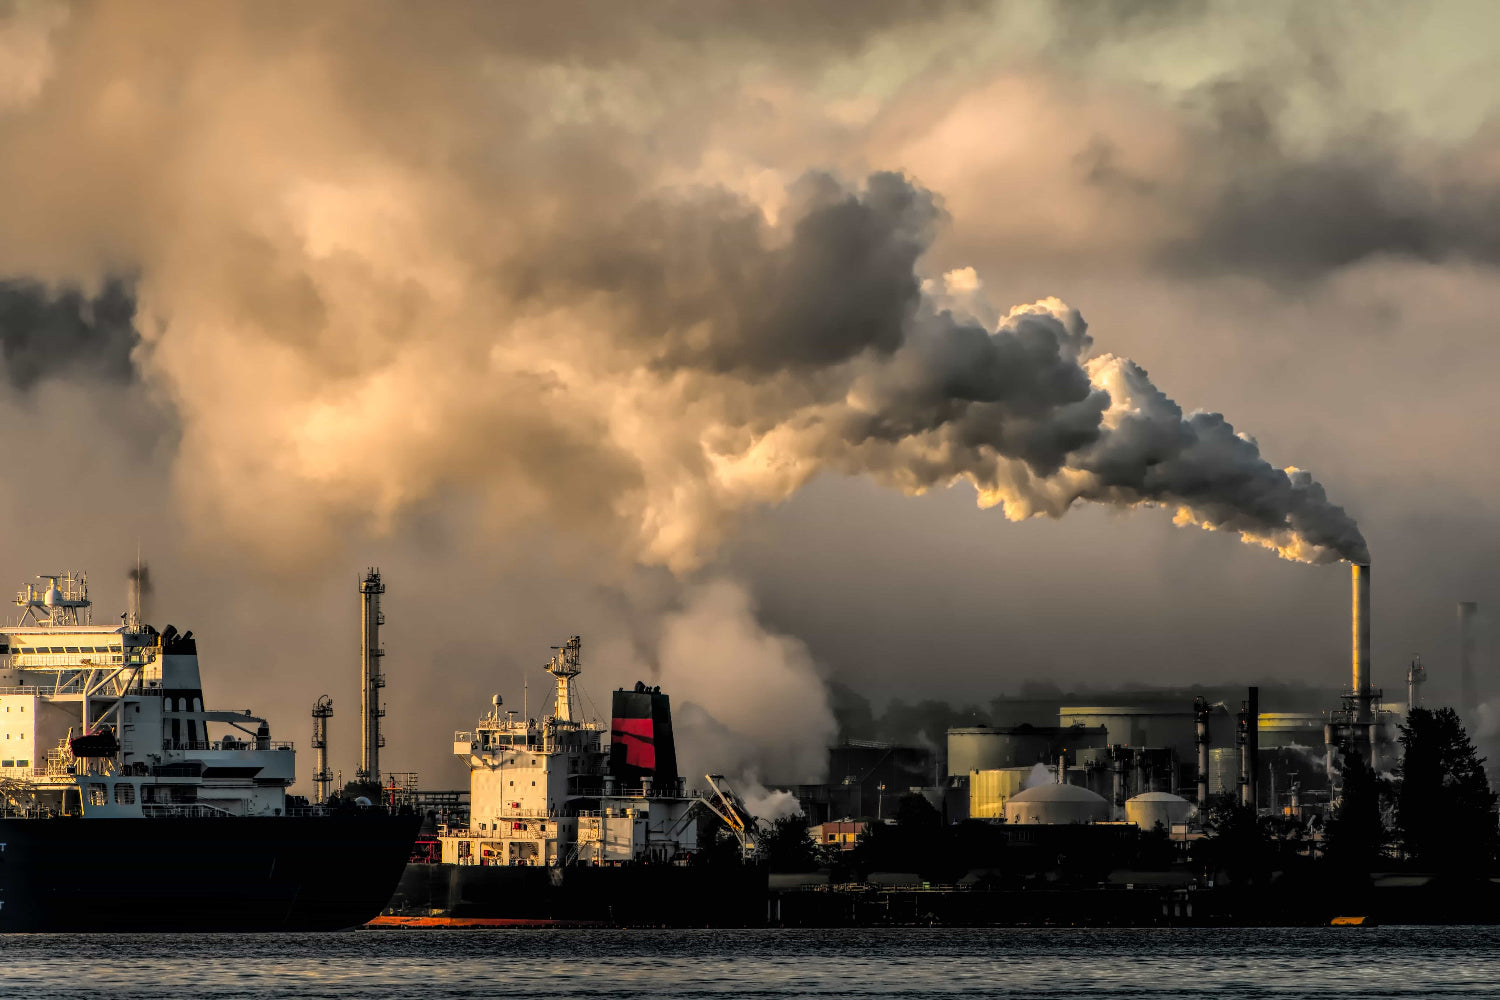 Image showing carbon emissions from a factory